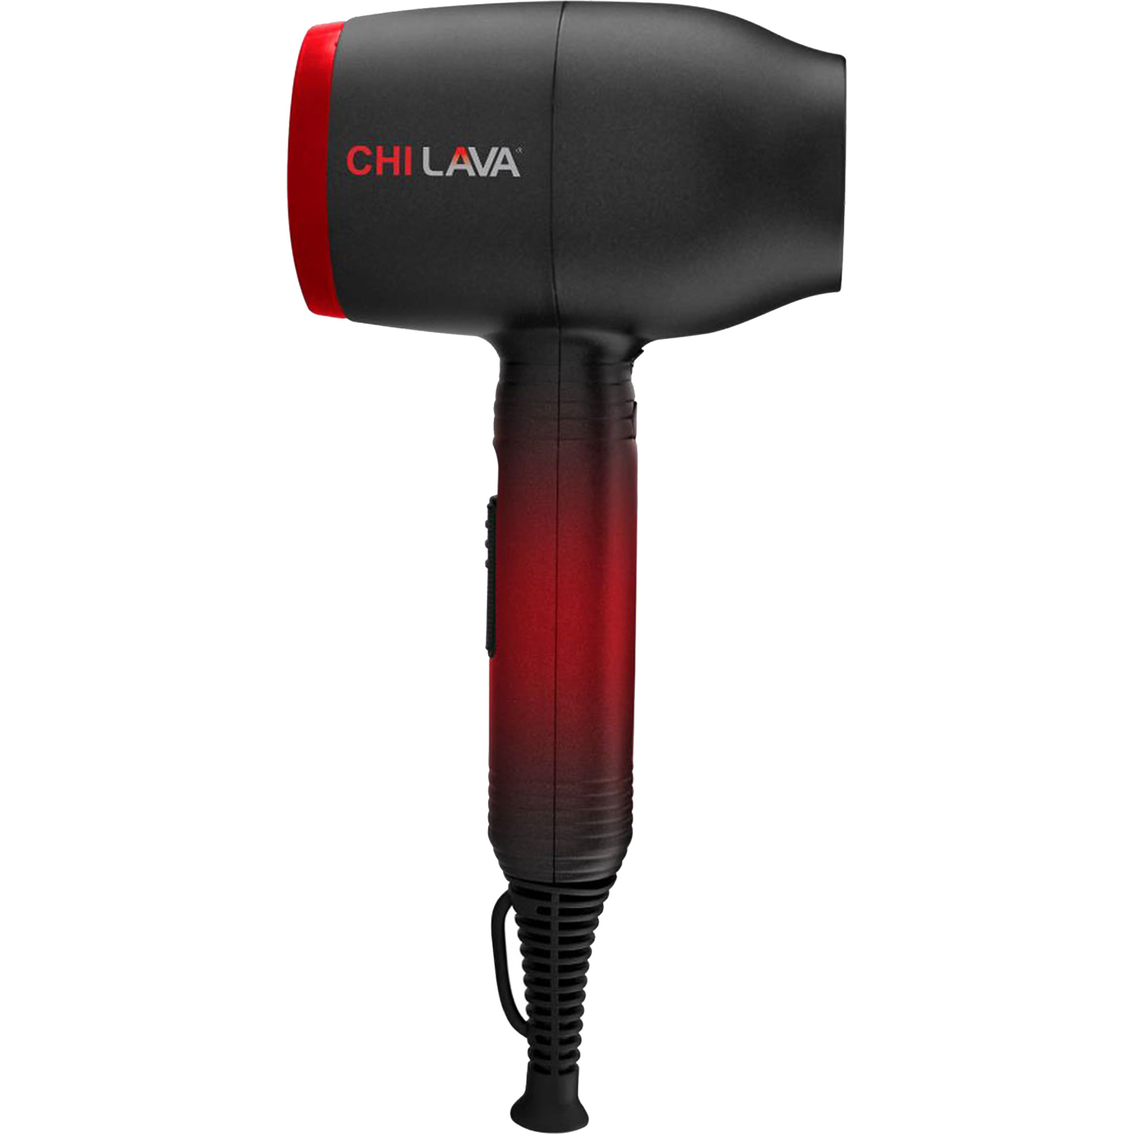 CHI Lava Hair Dryer - Image 2 of 8